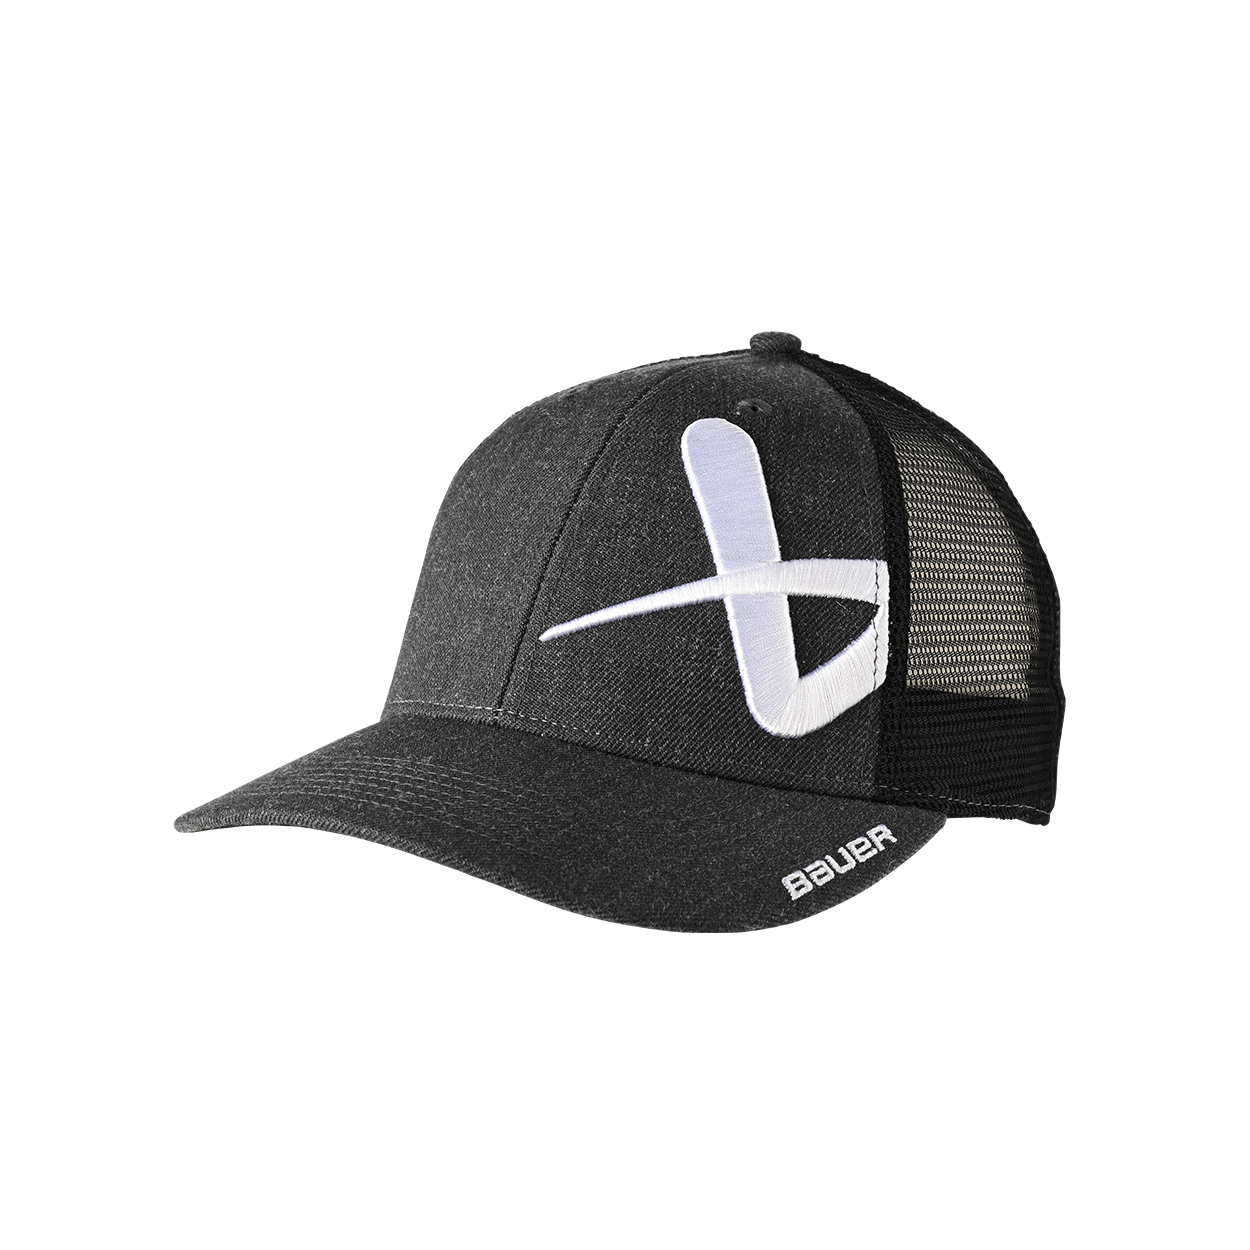 BAUER CORE SNAPBACK CAP YOUTH